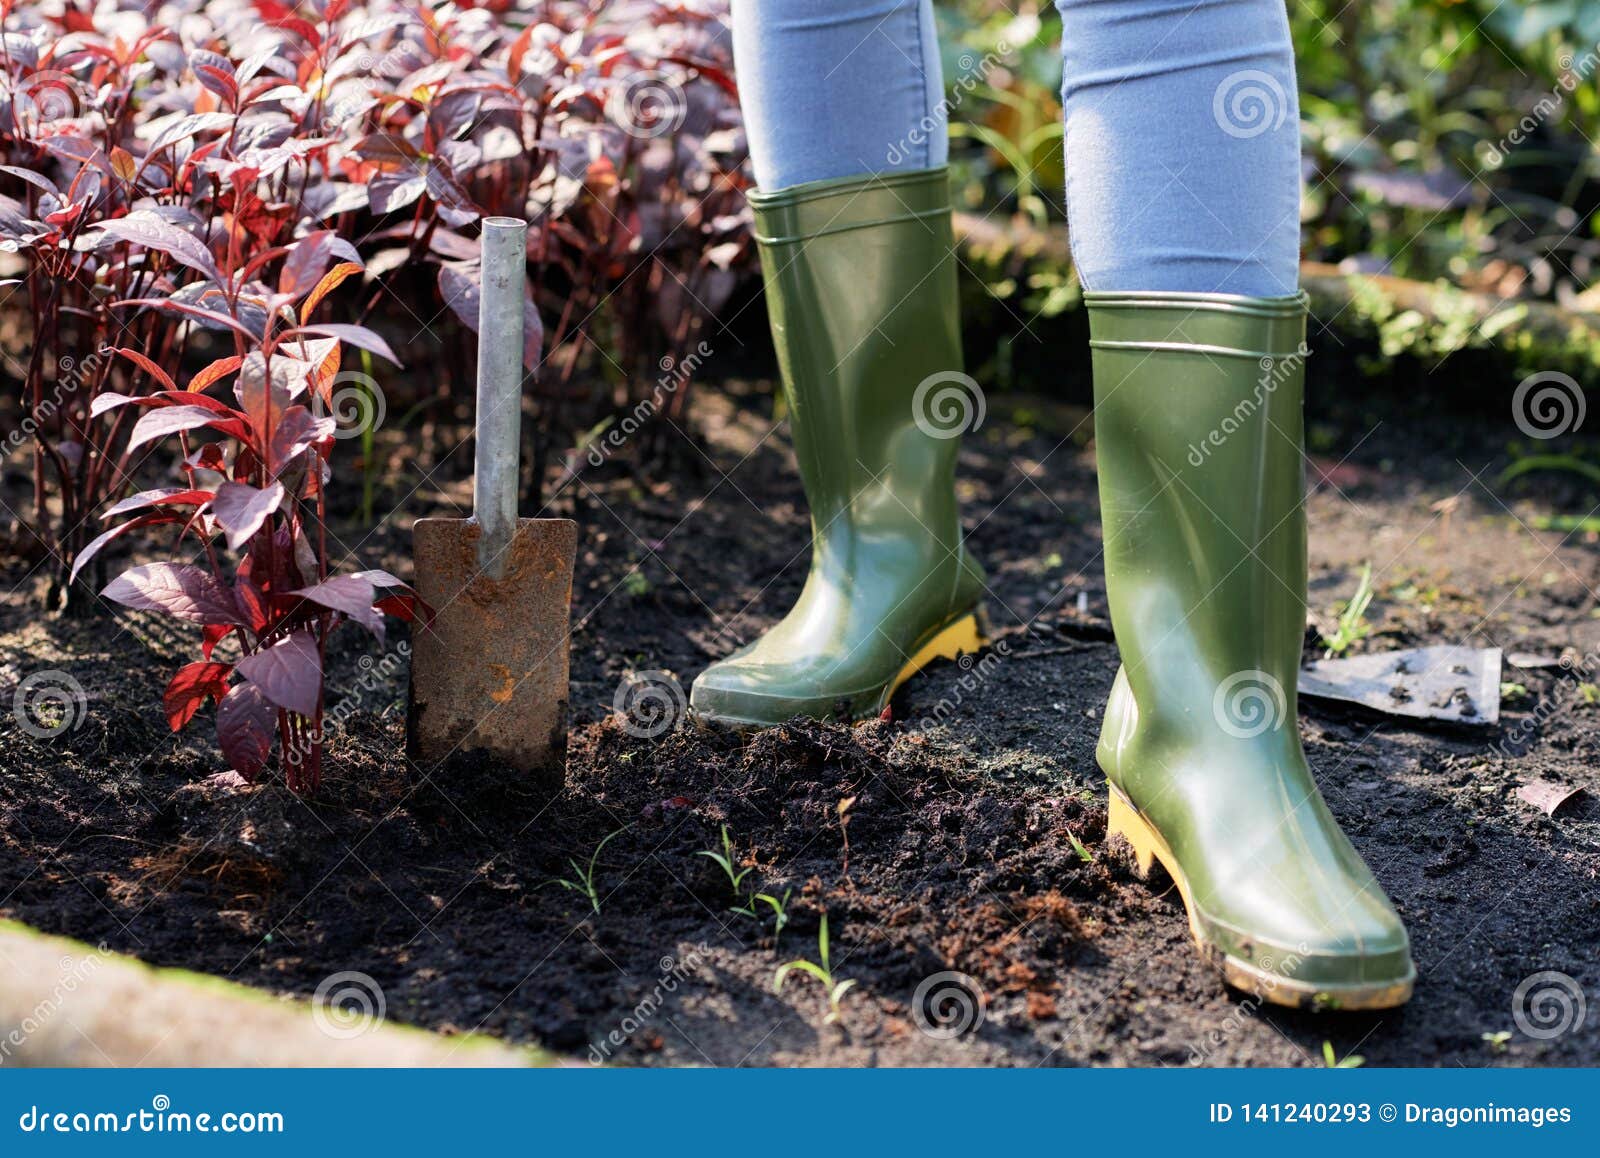 Woman Planting Red Amaranth Stock Image - Image of tool, farm: 141240293